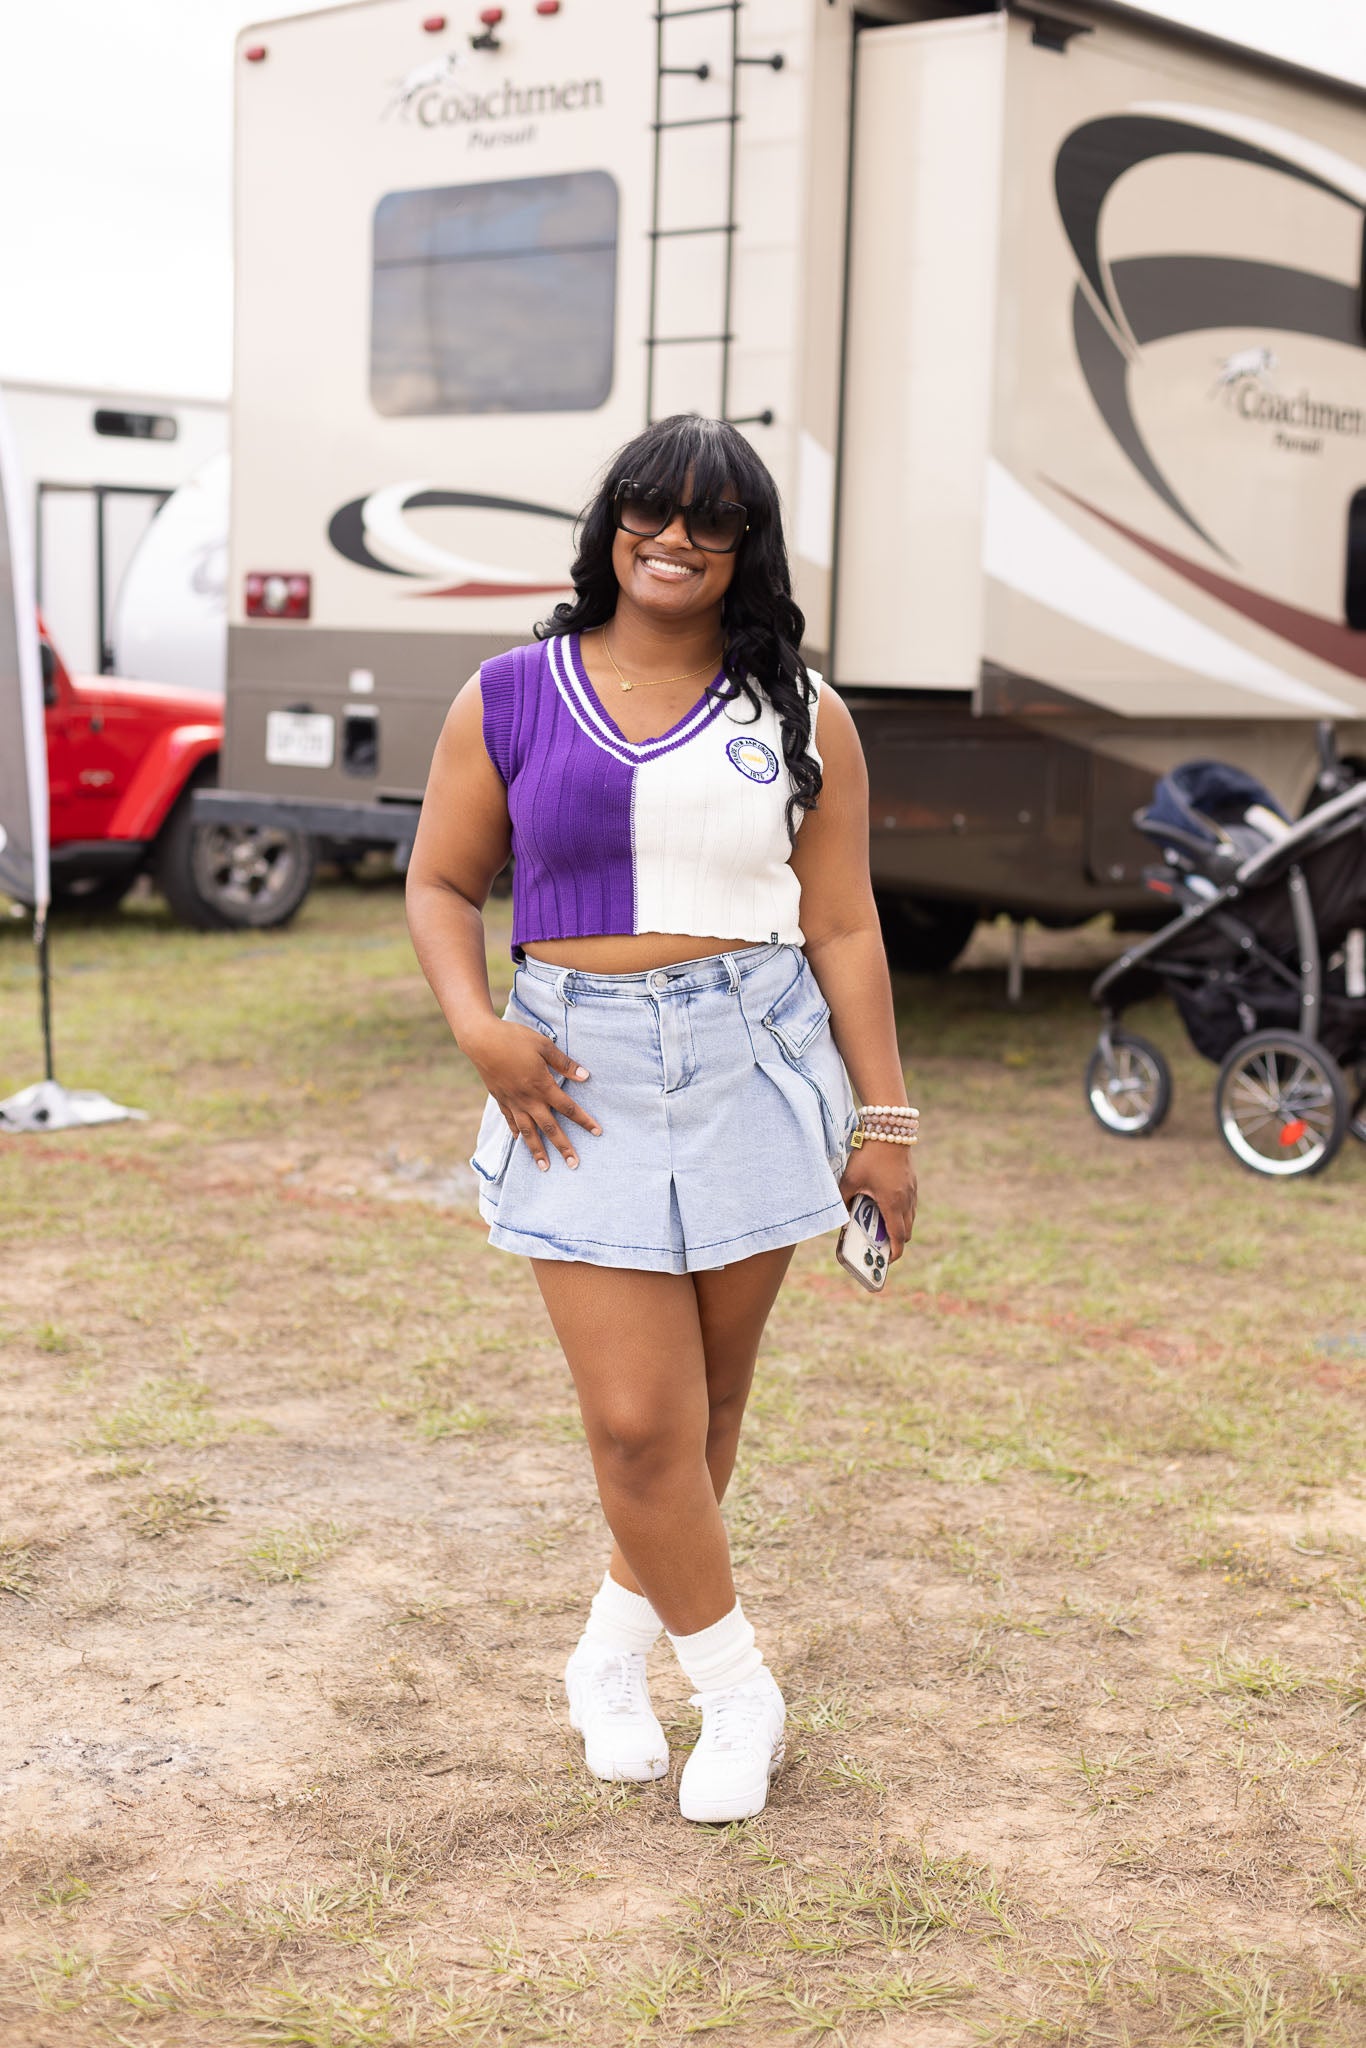 The Best Looks At Prairie View A&M University's Homecoming Football Game